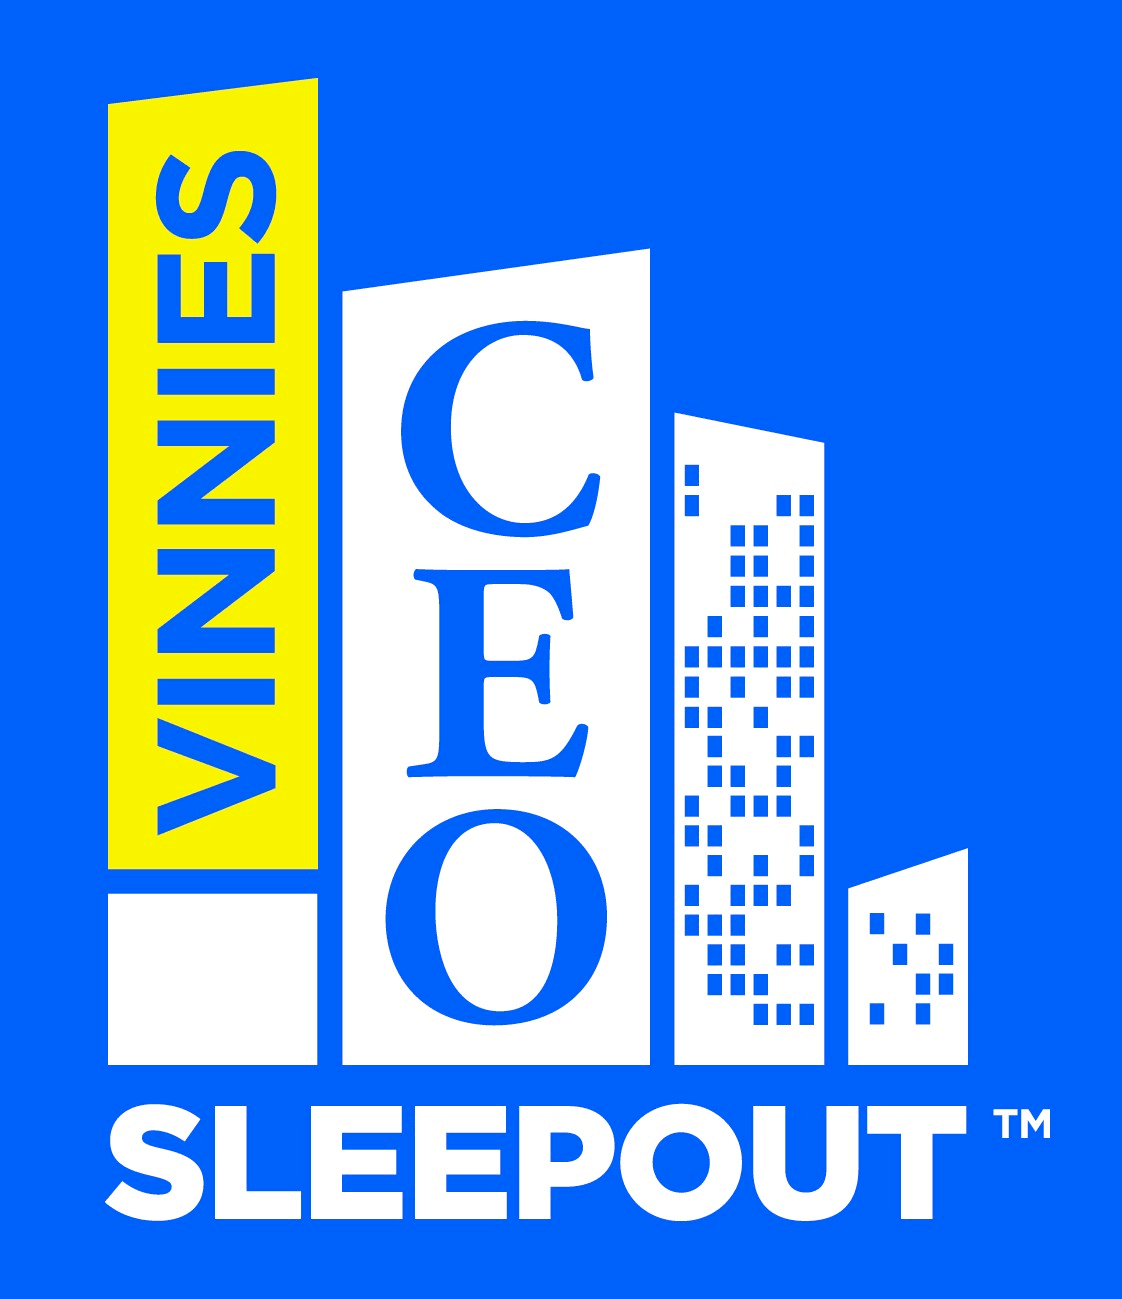 2020 Vinnies CEO Sleepout